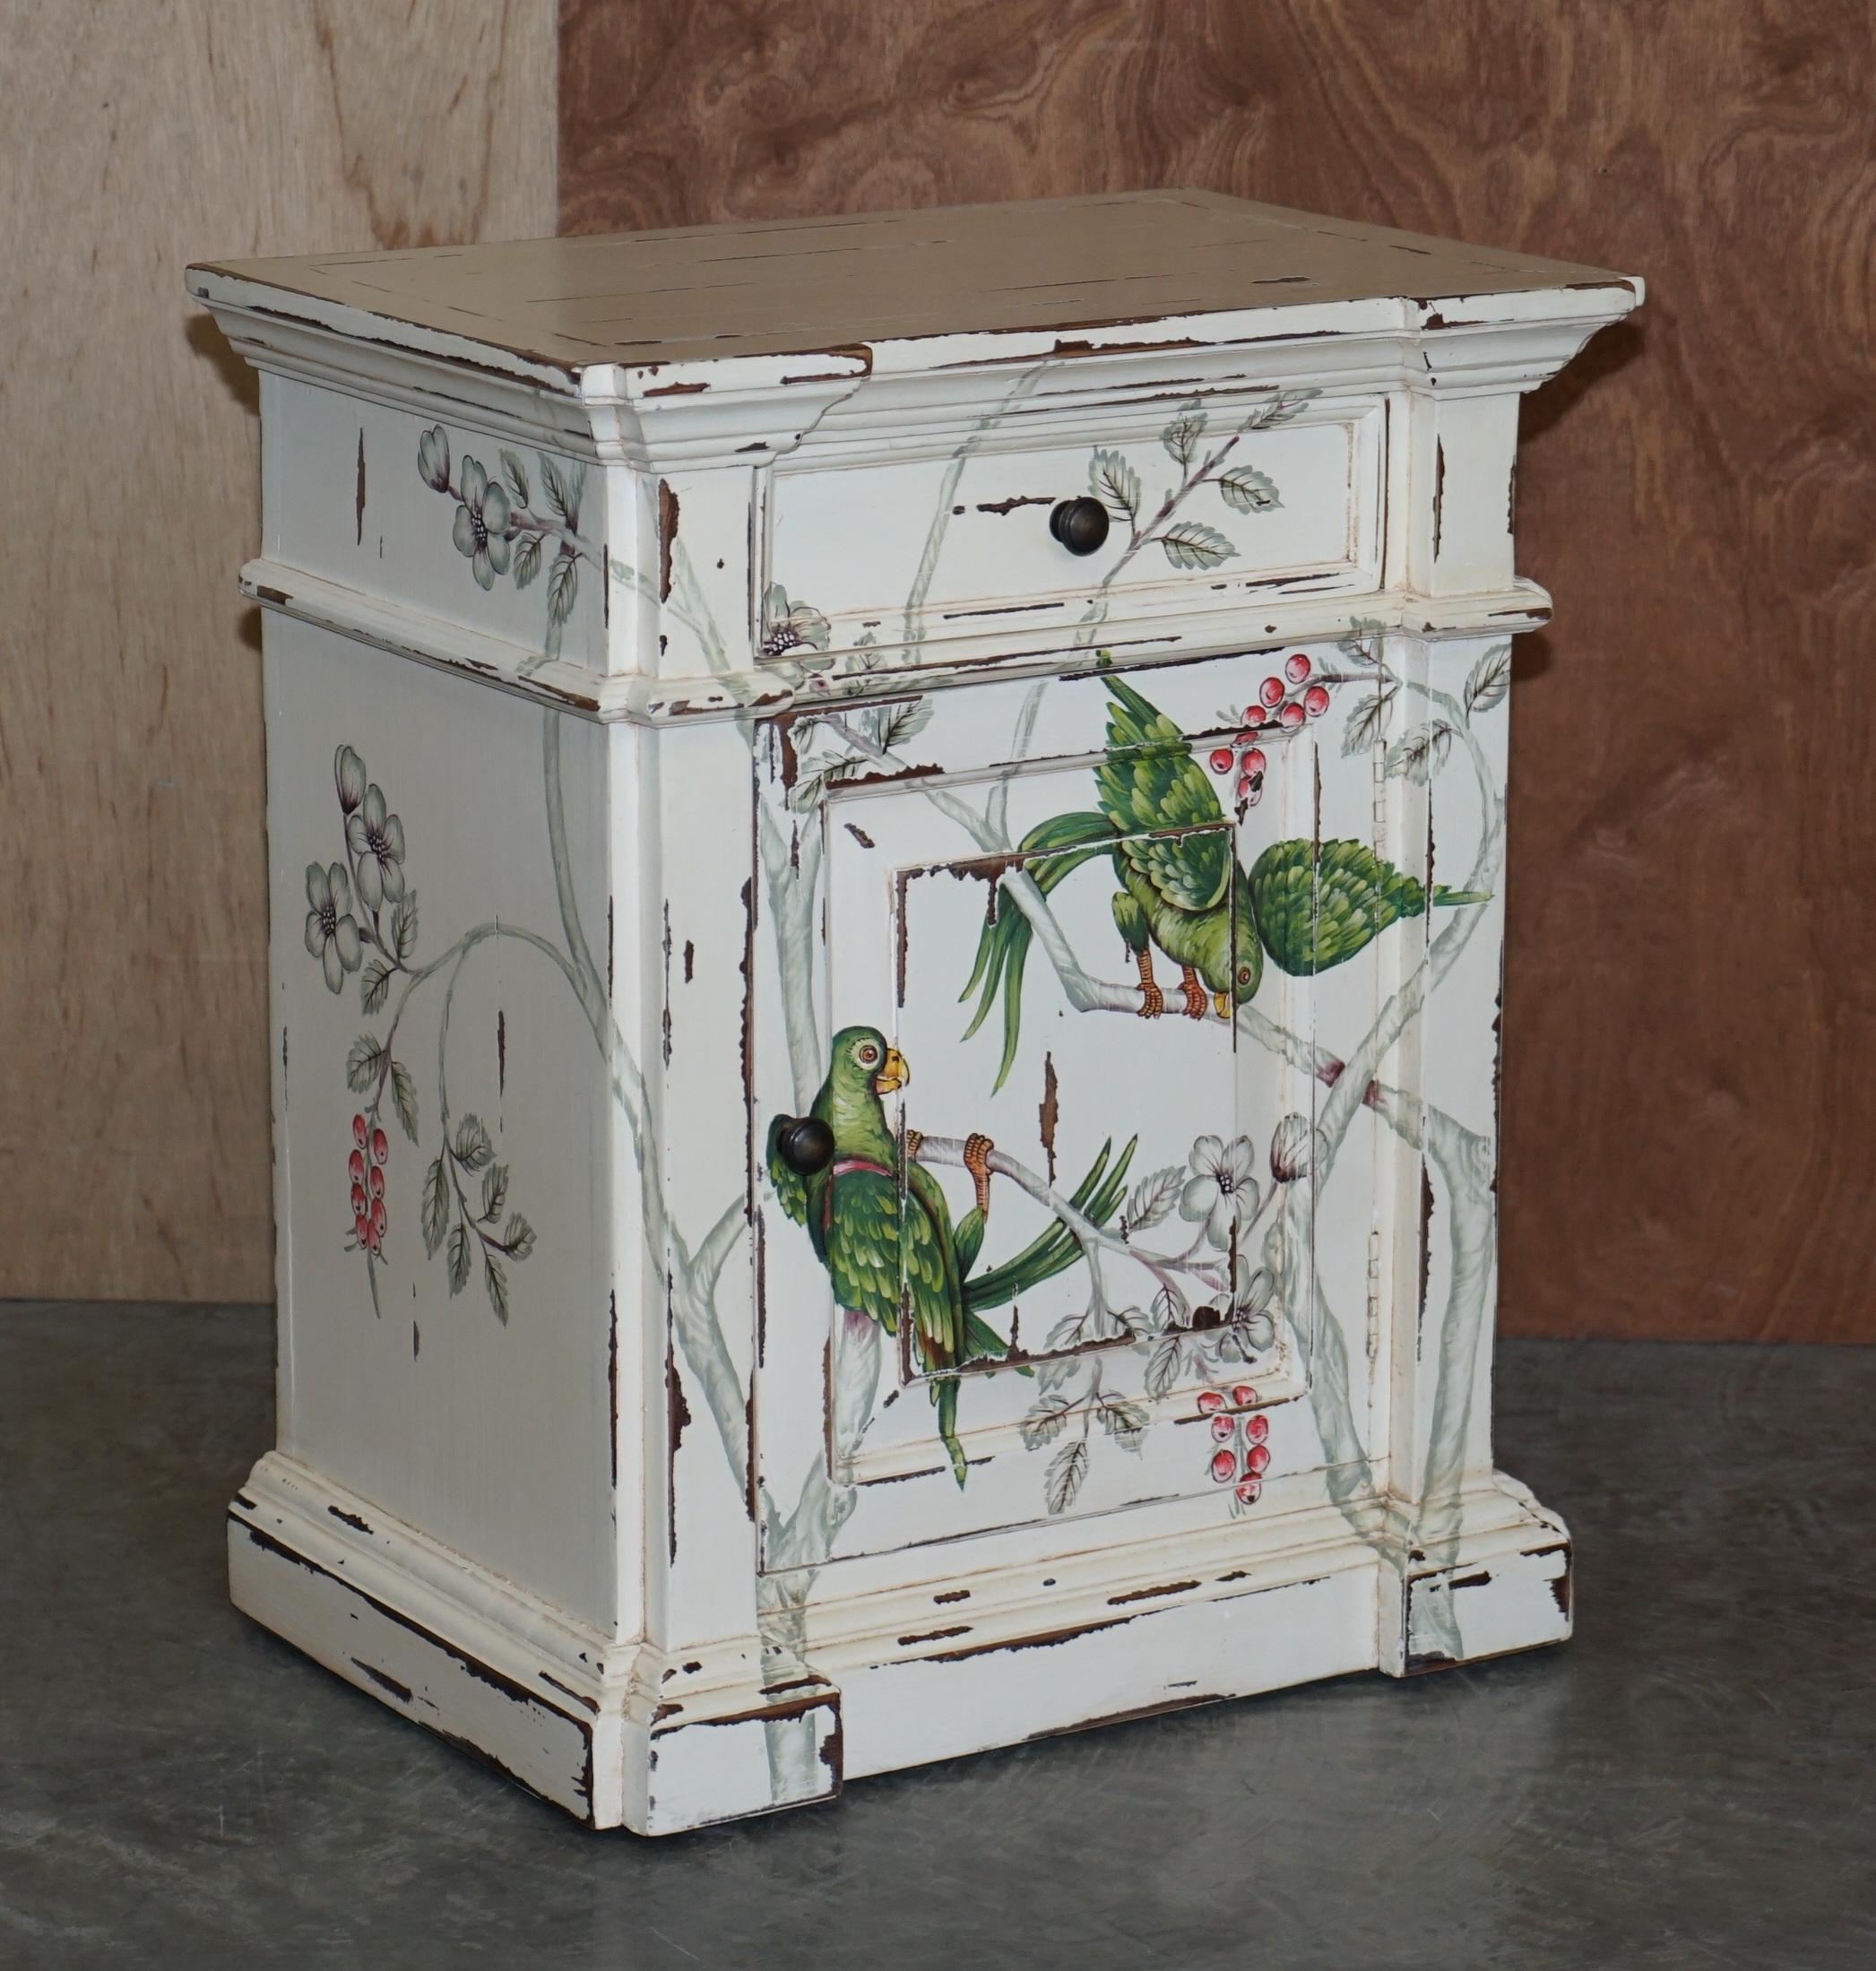 We are delighted to offer for sale this lovely pair of mahogany framed hand painted side table or bedside table cupboards with single drawers

These are well made and decorative chests, quite utilitarian, they can be used in the bedroom as bedside